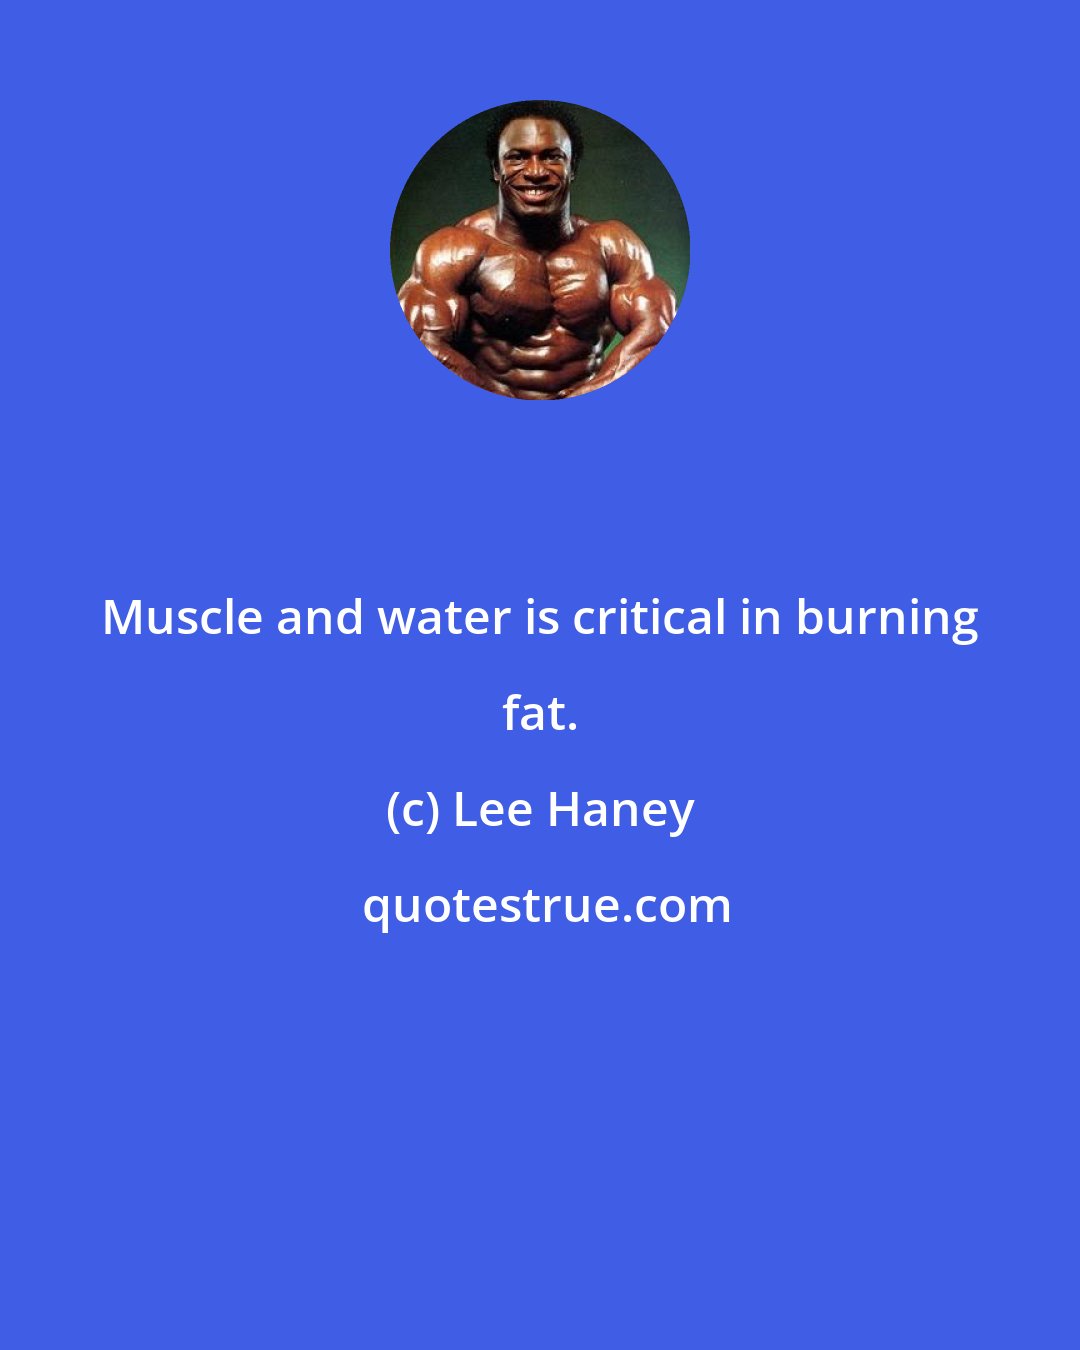 Lee Haney: Muscle and water is critical in burning fat.